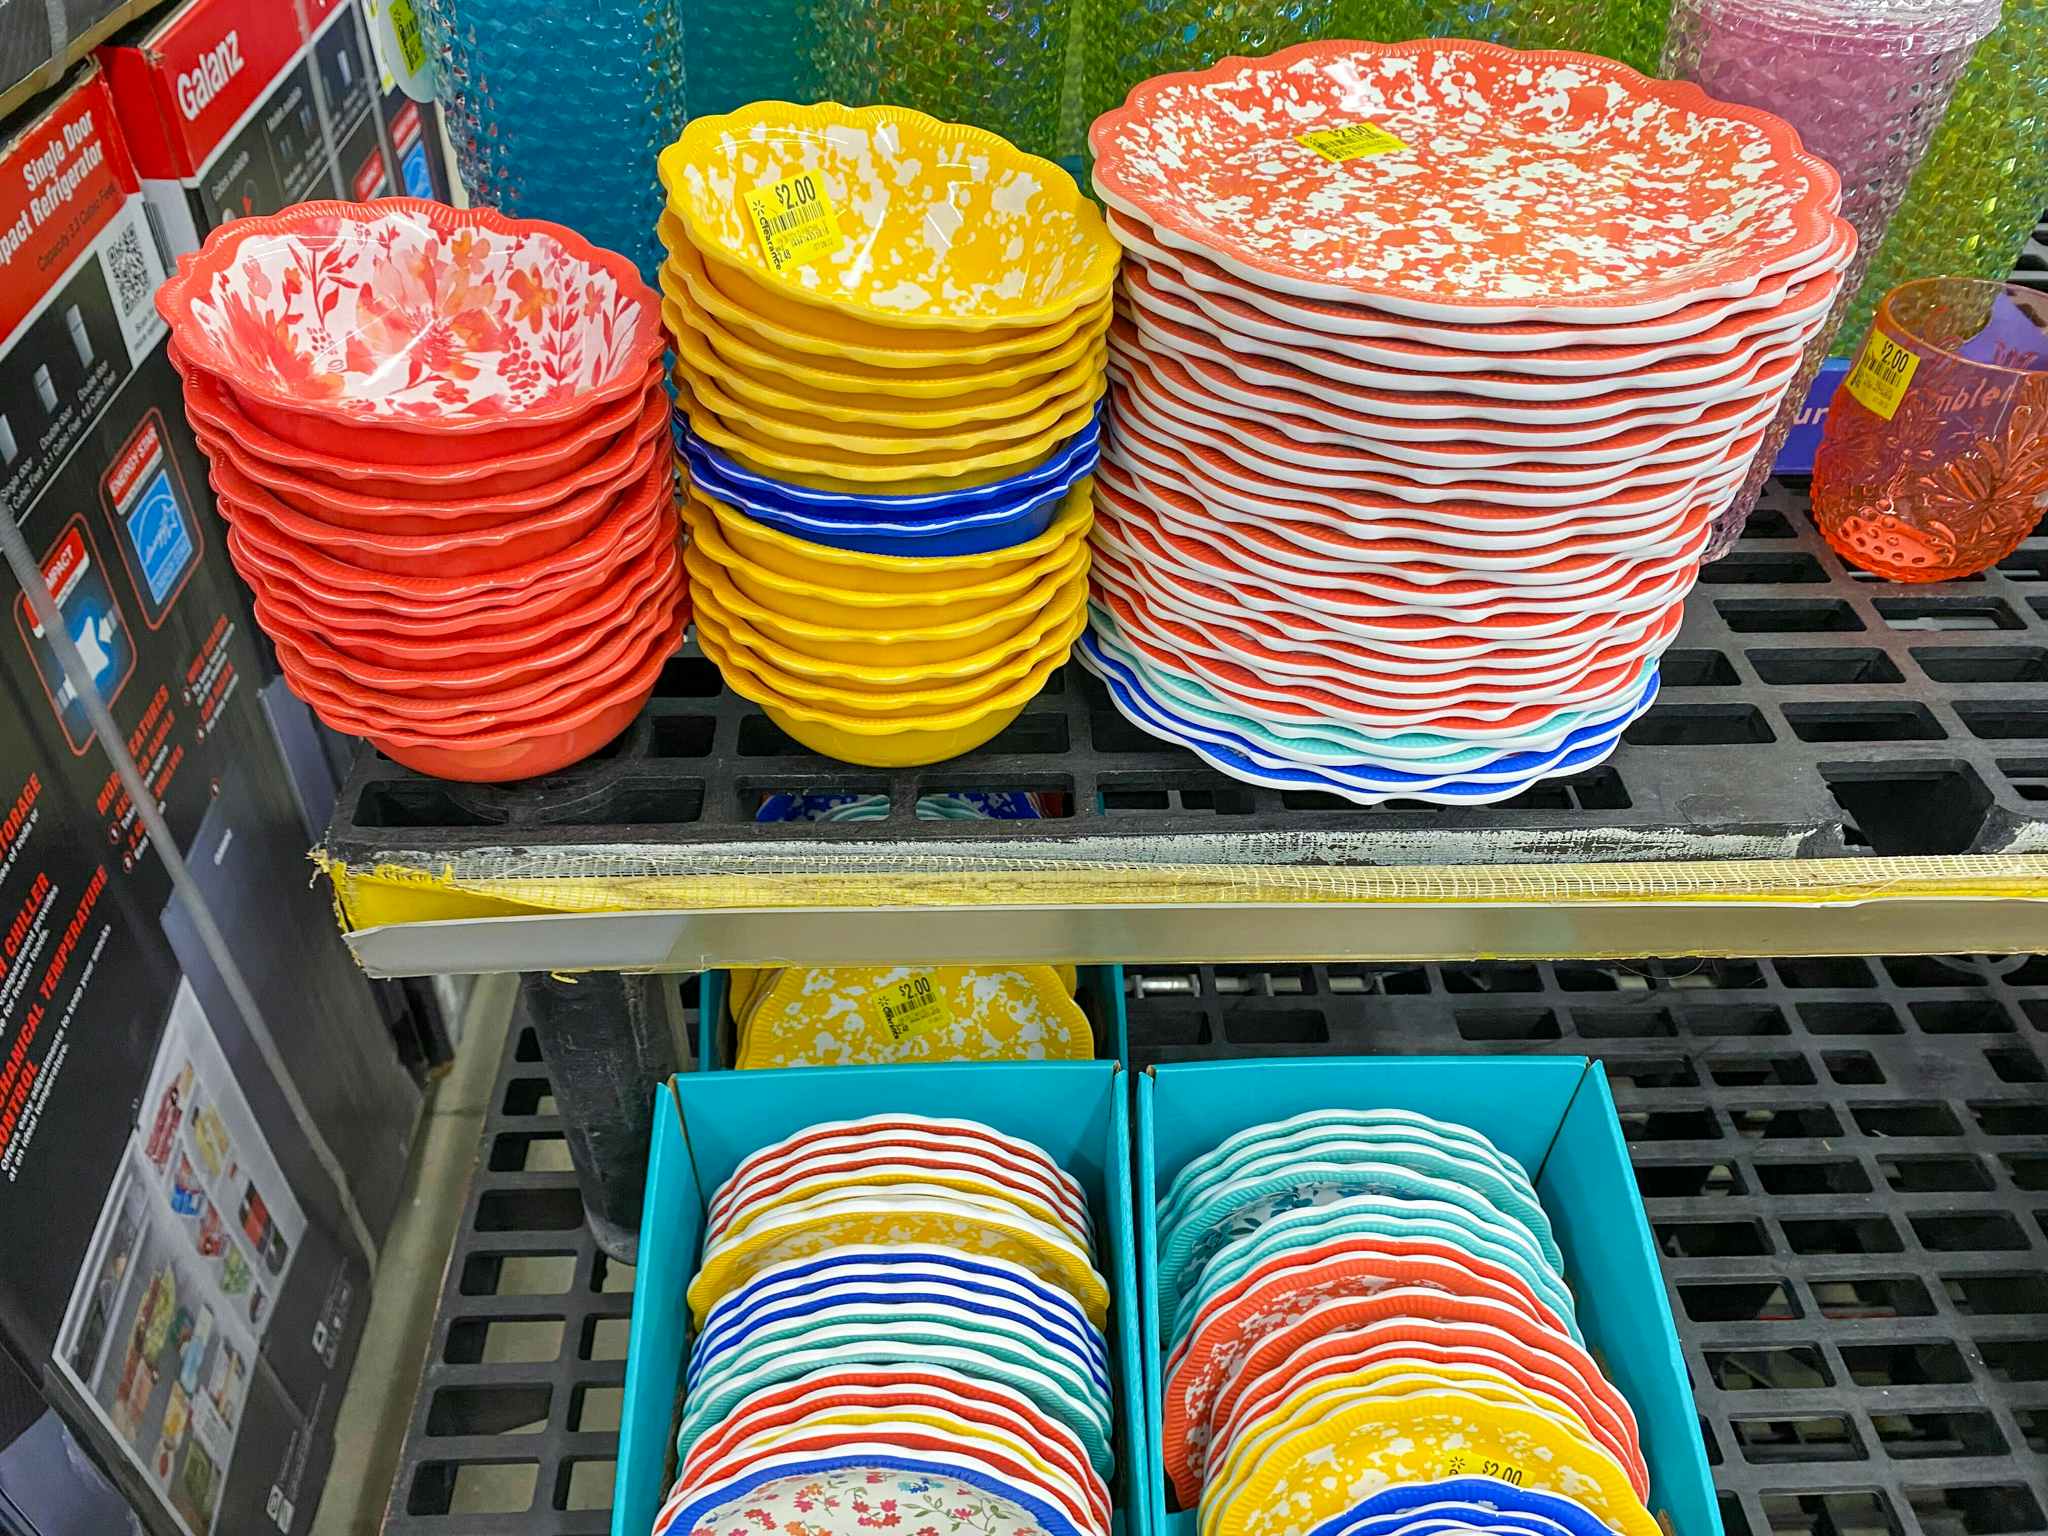 pioneer woman bowl and plates on clearance shelf at walmart